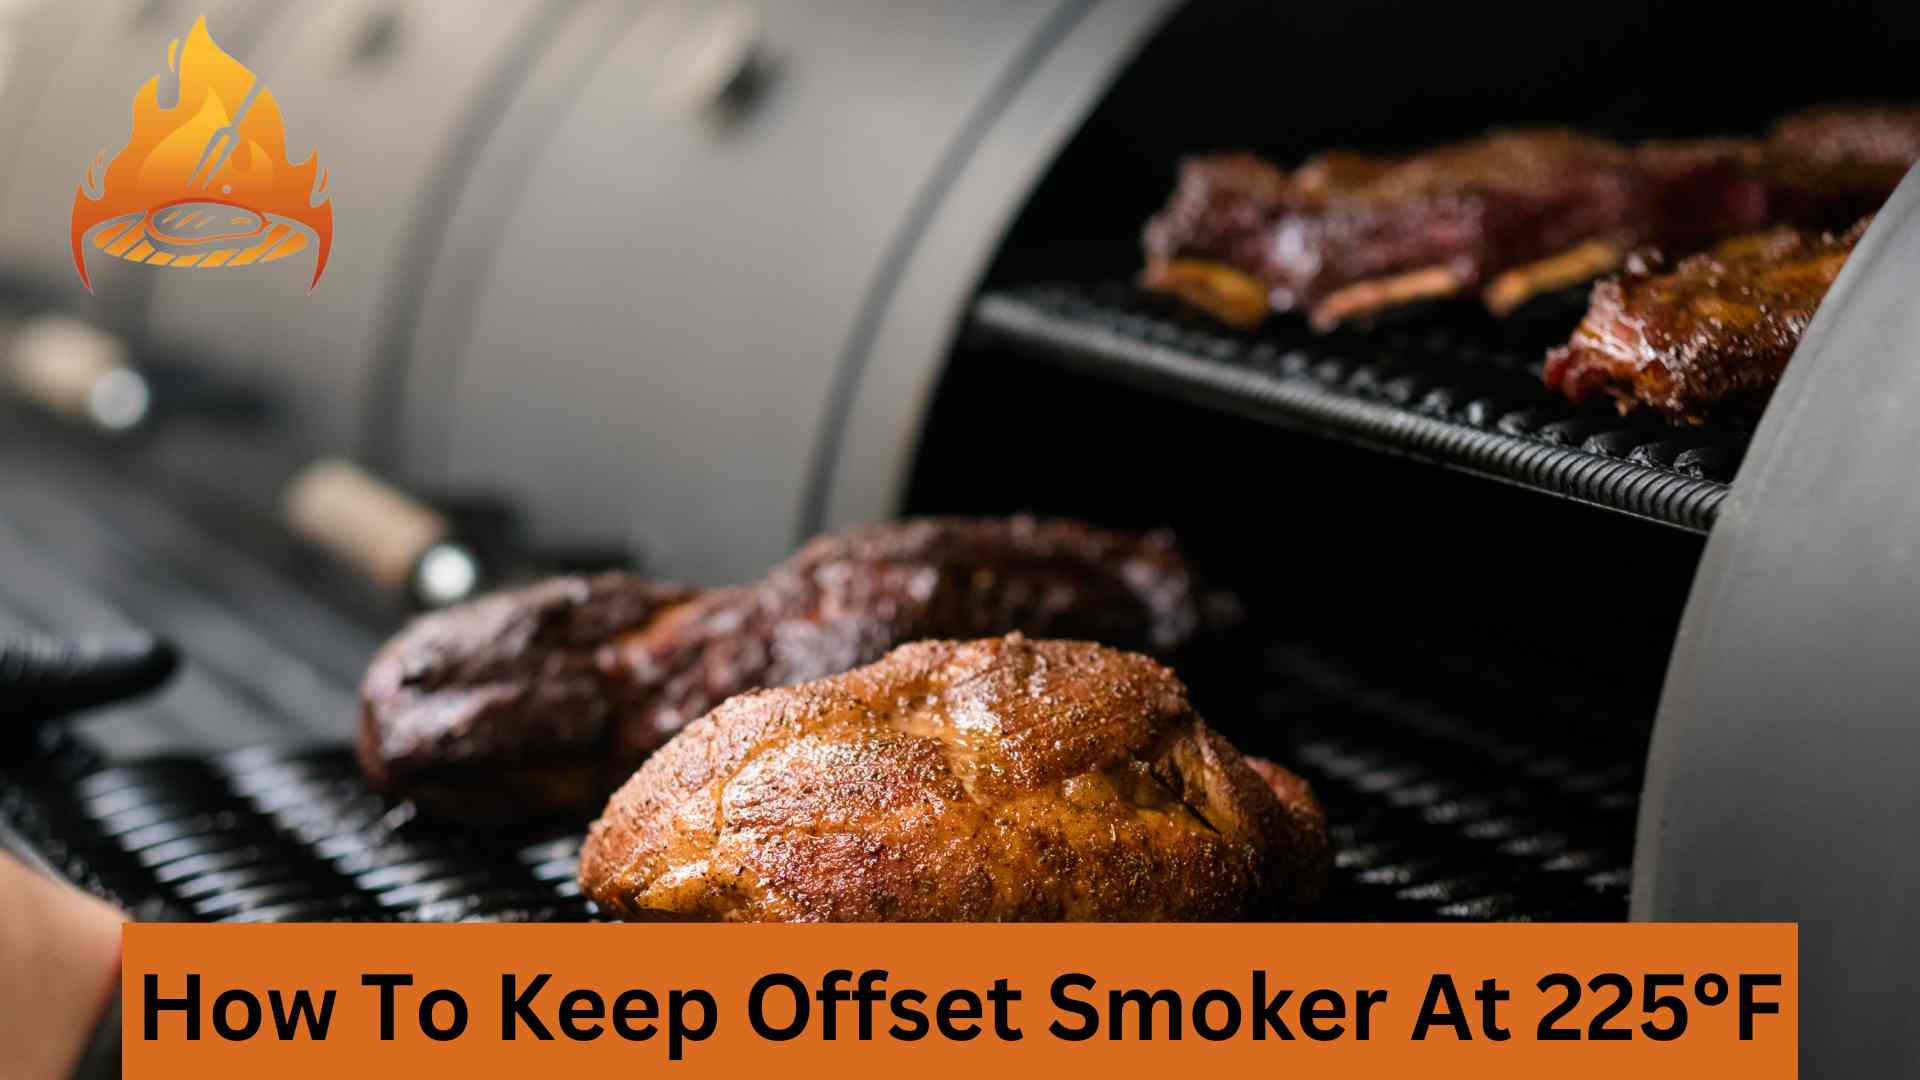 How To Keep Offset Smoker At 225°F